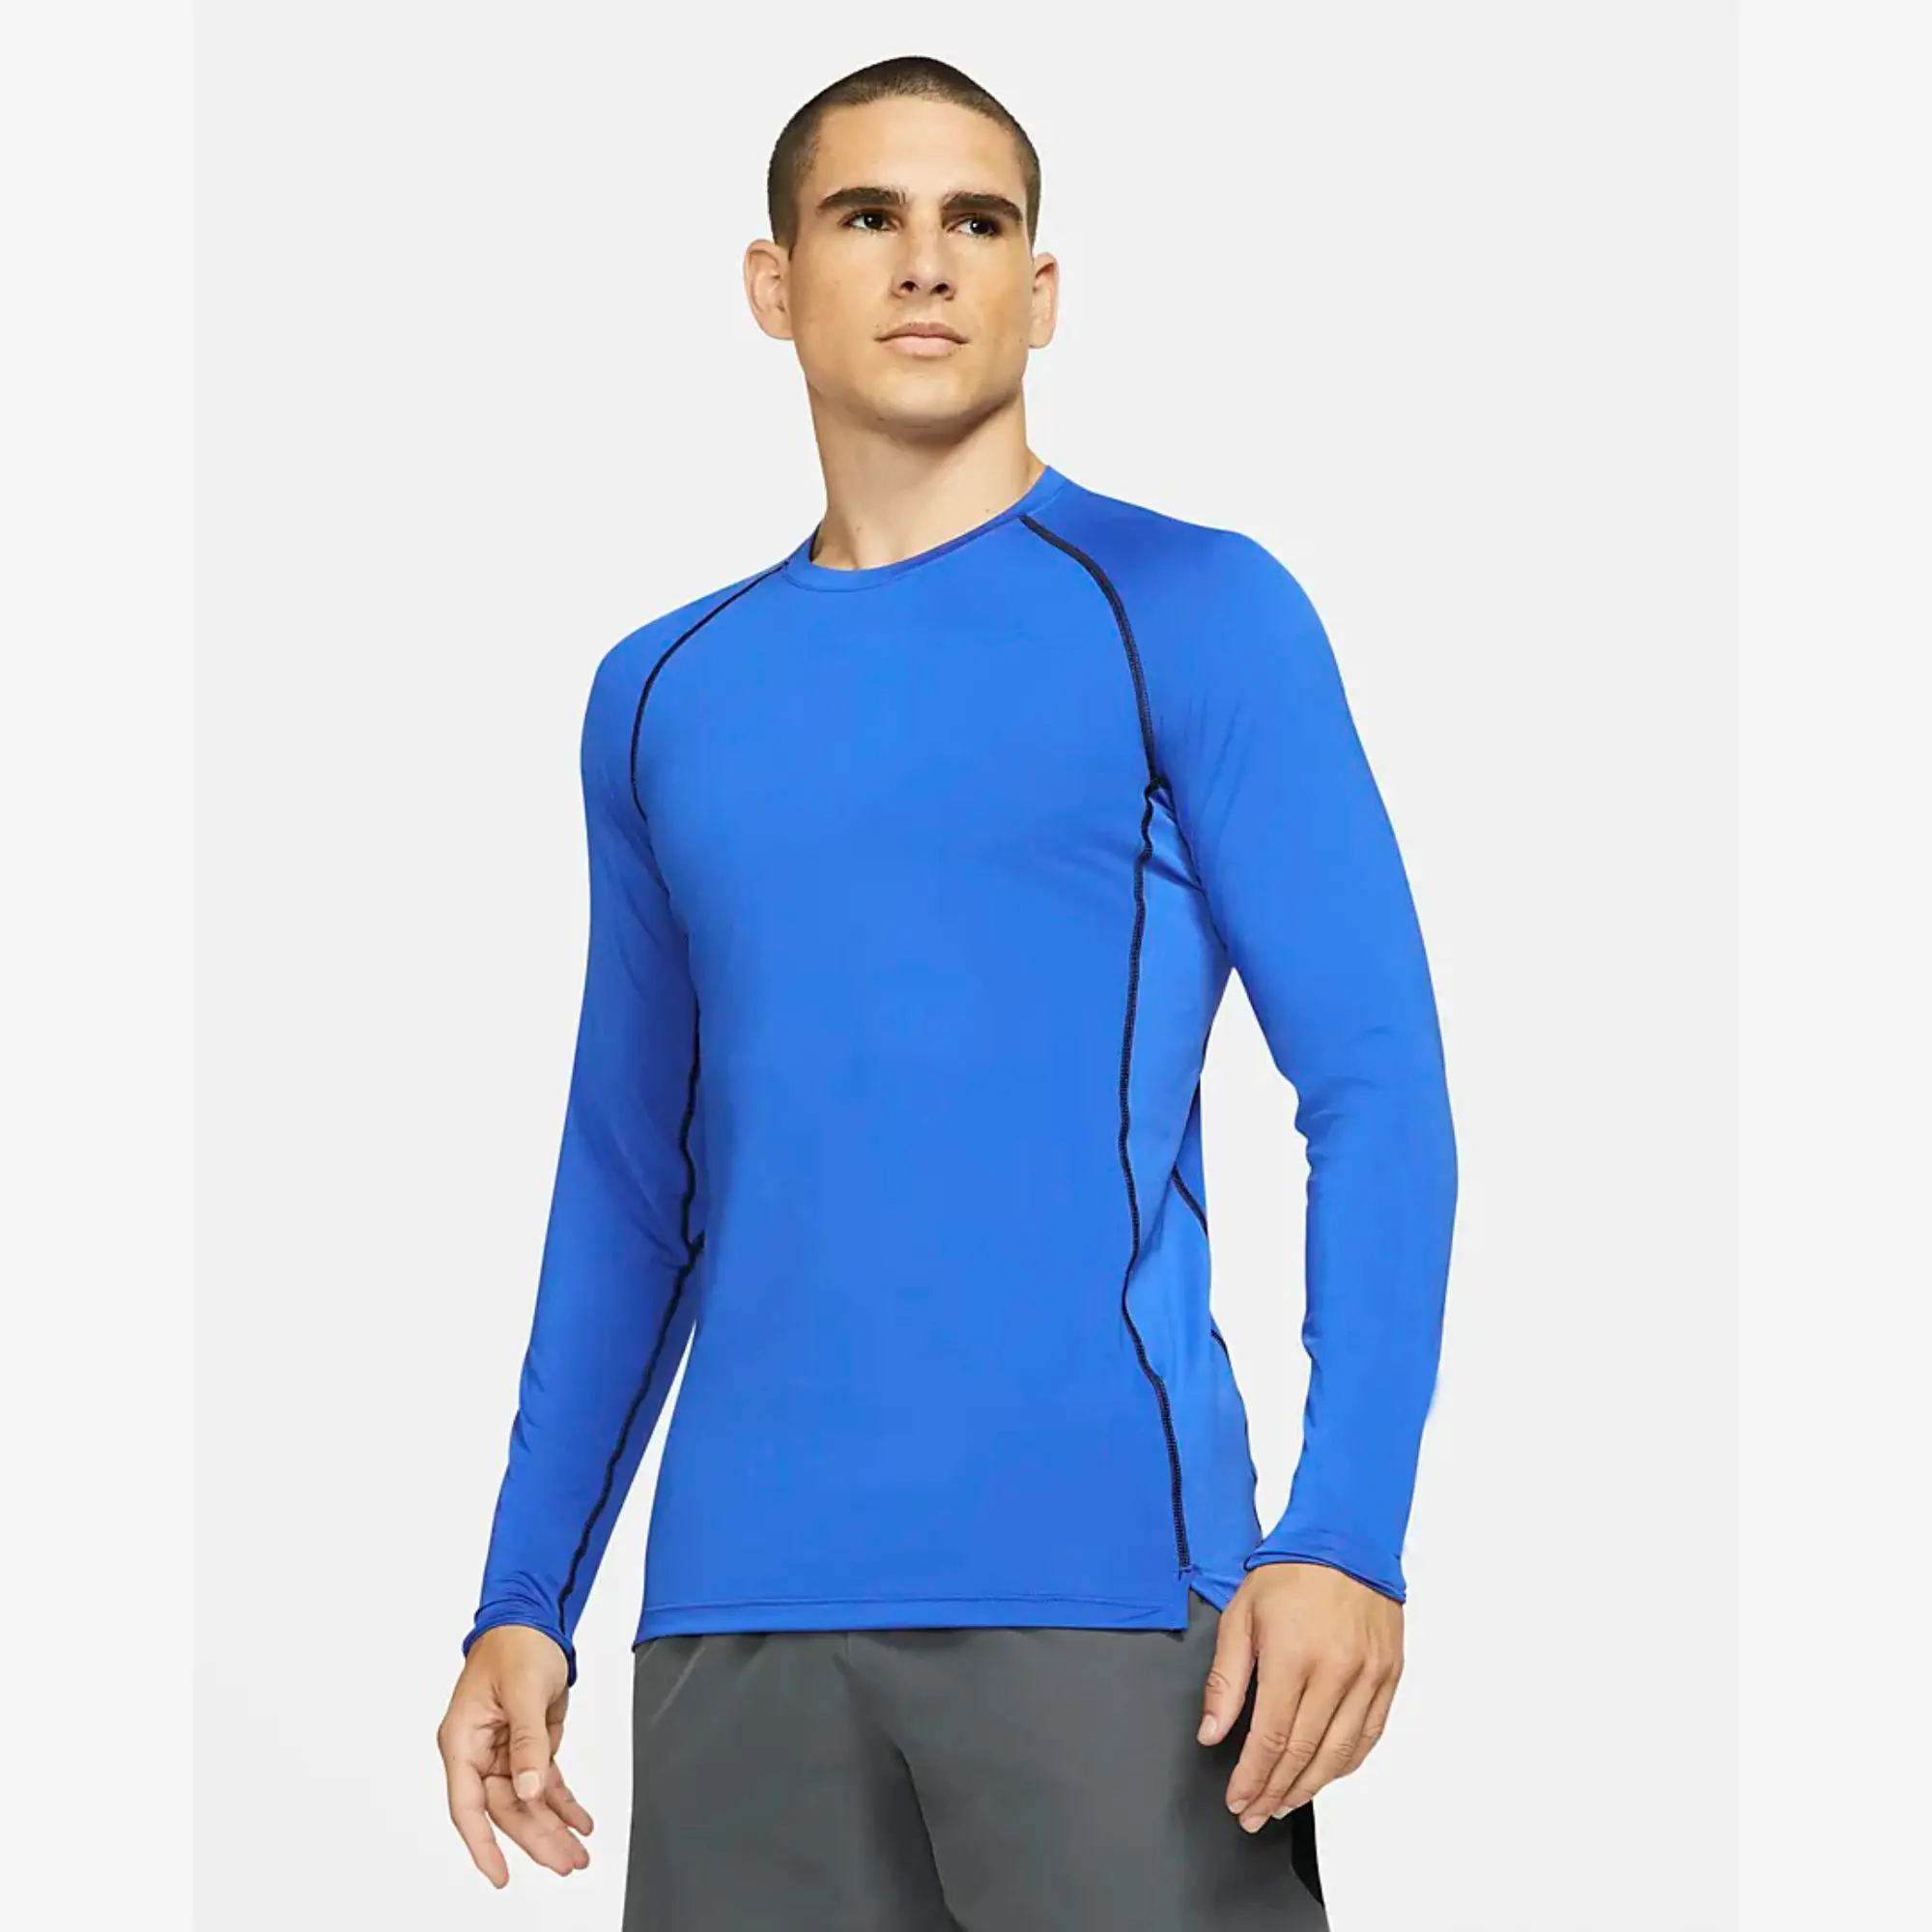 Sweat Wicking Lightweight Stretchy 92% Polyester 8% Spandex Game Royal Mens Slim Fit Long Sleeve Top with Built in Breathability